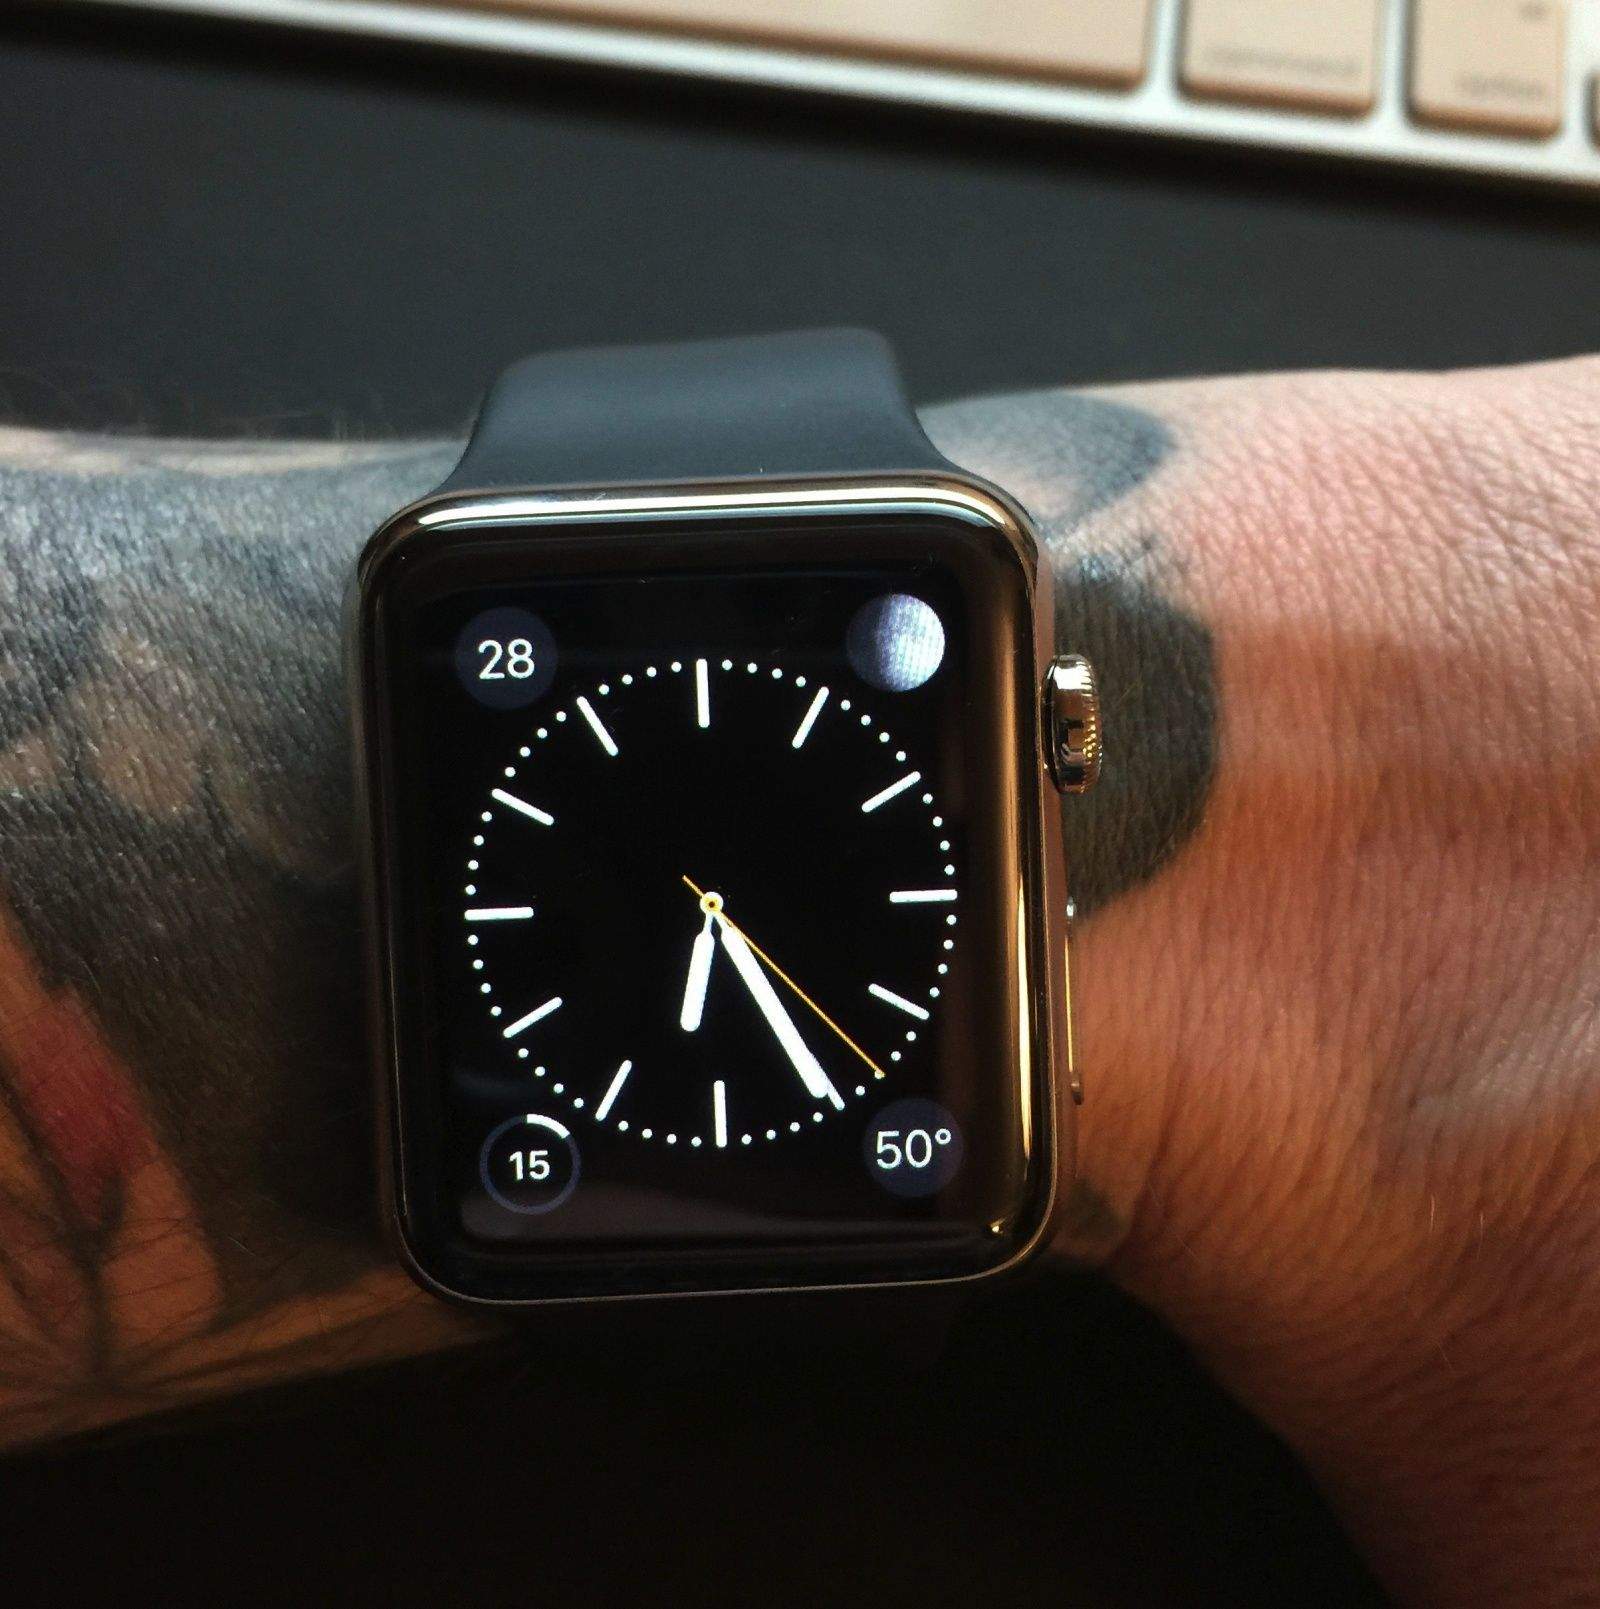 Using an Apple Watch with a tattoo gives some users a (s)inking feeling. Photo: